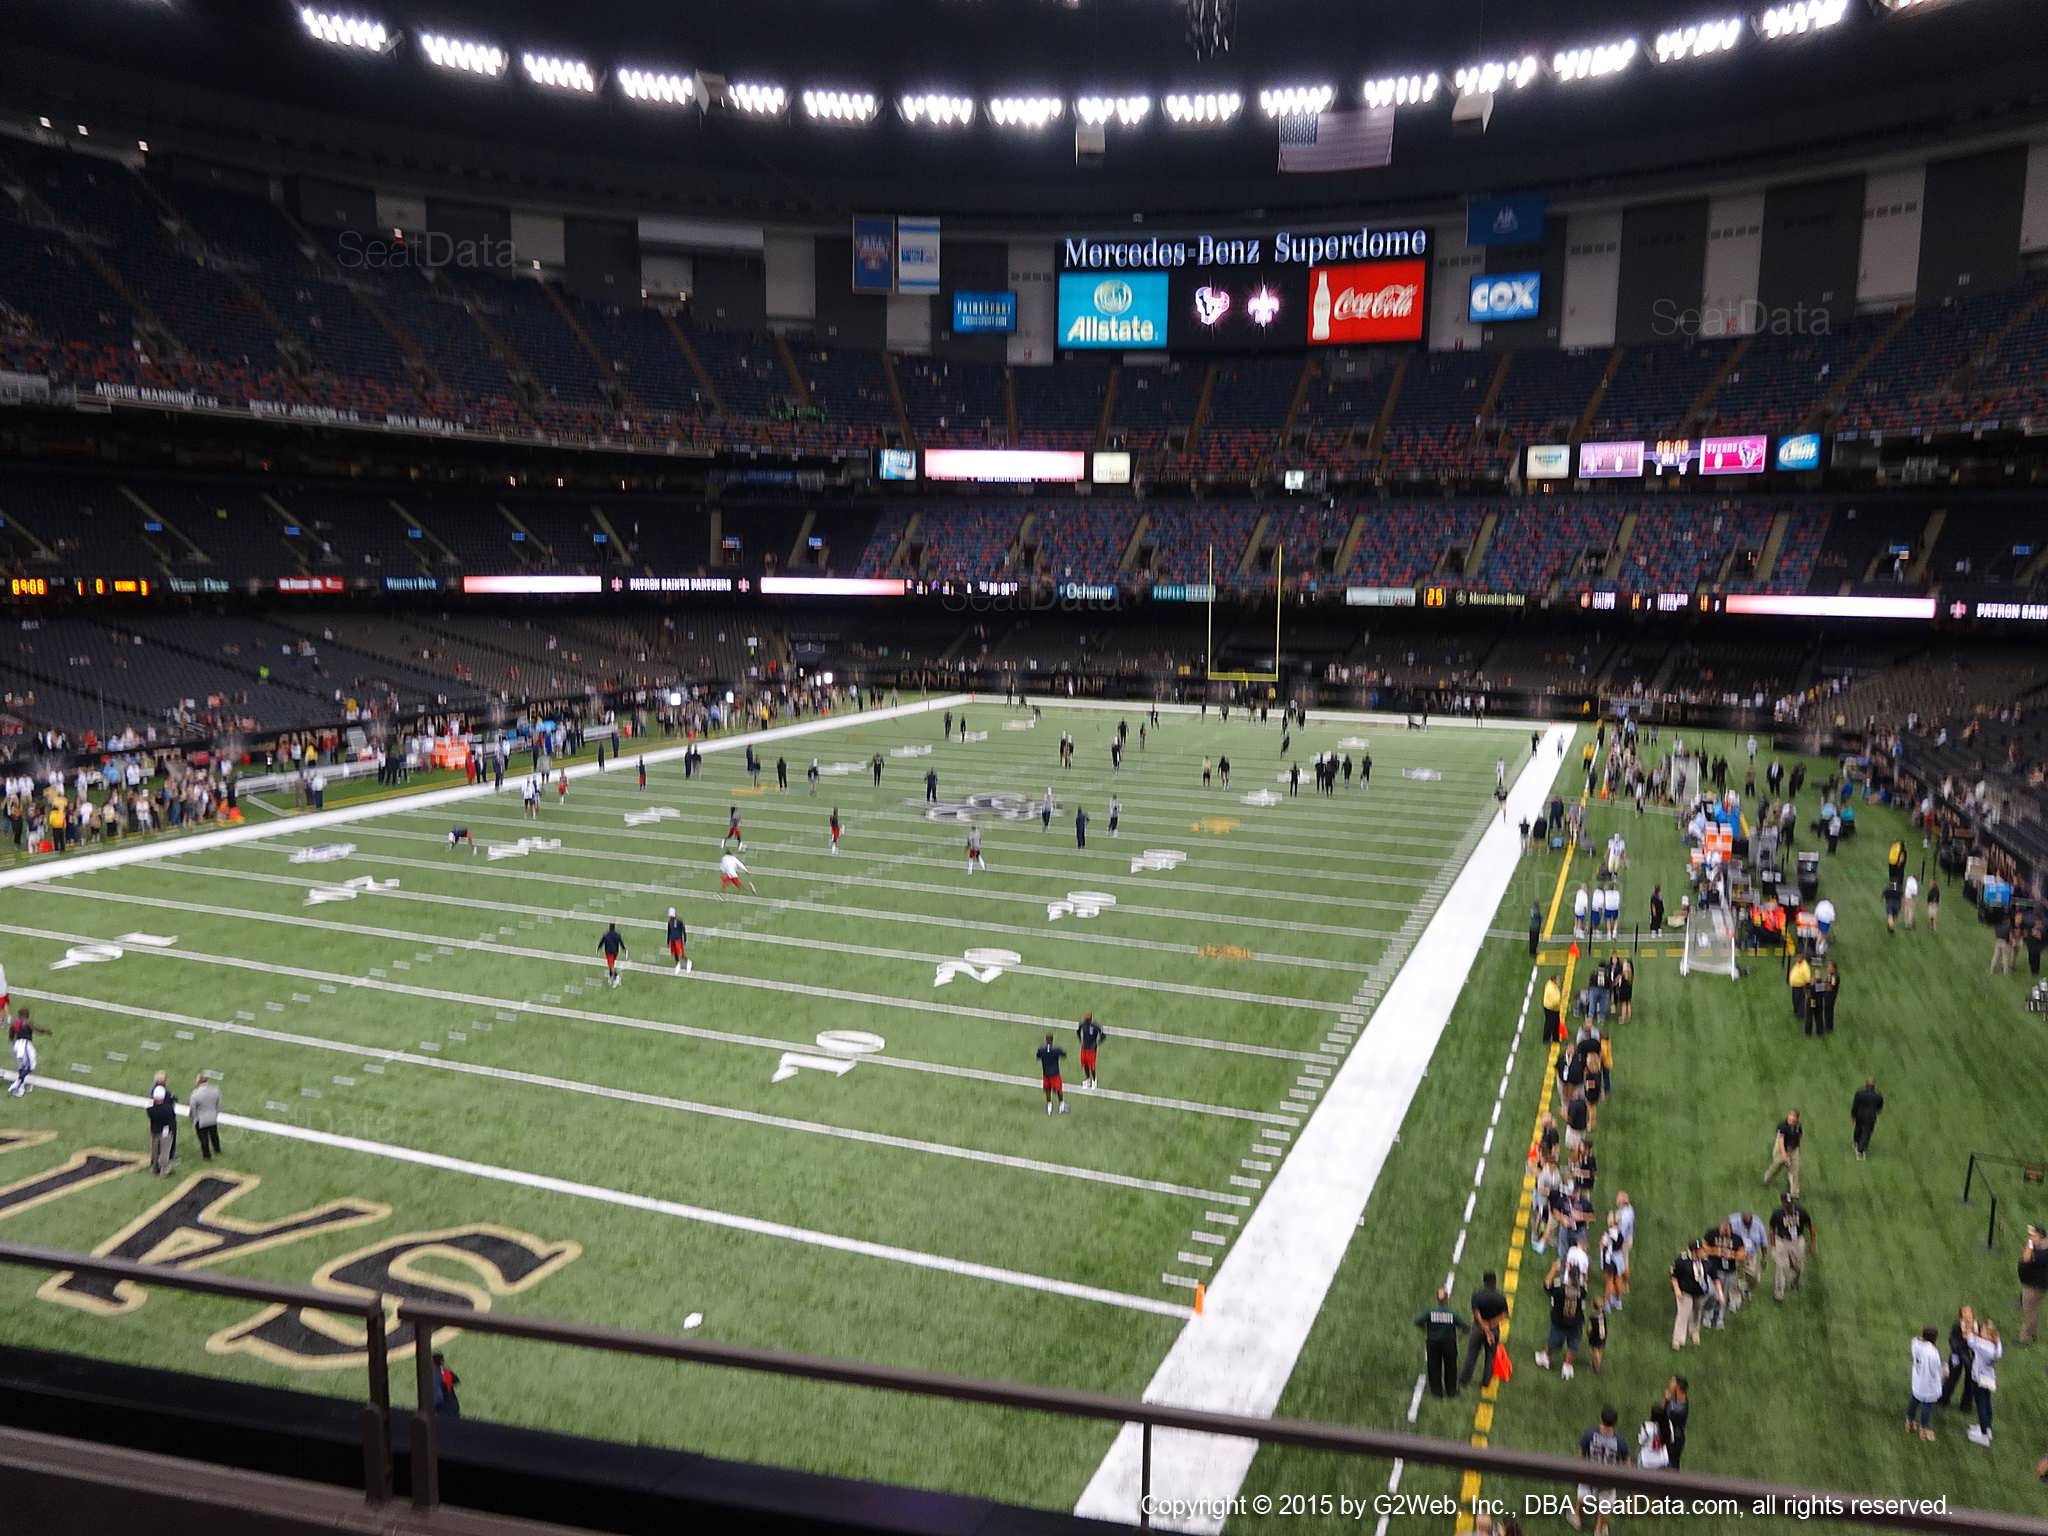 Seat view from section 279 at the Mercedes-Benz Superdome, home of the New Orleans Saints